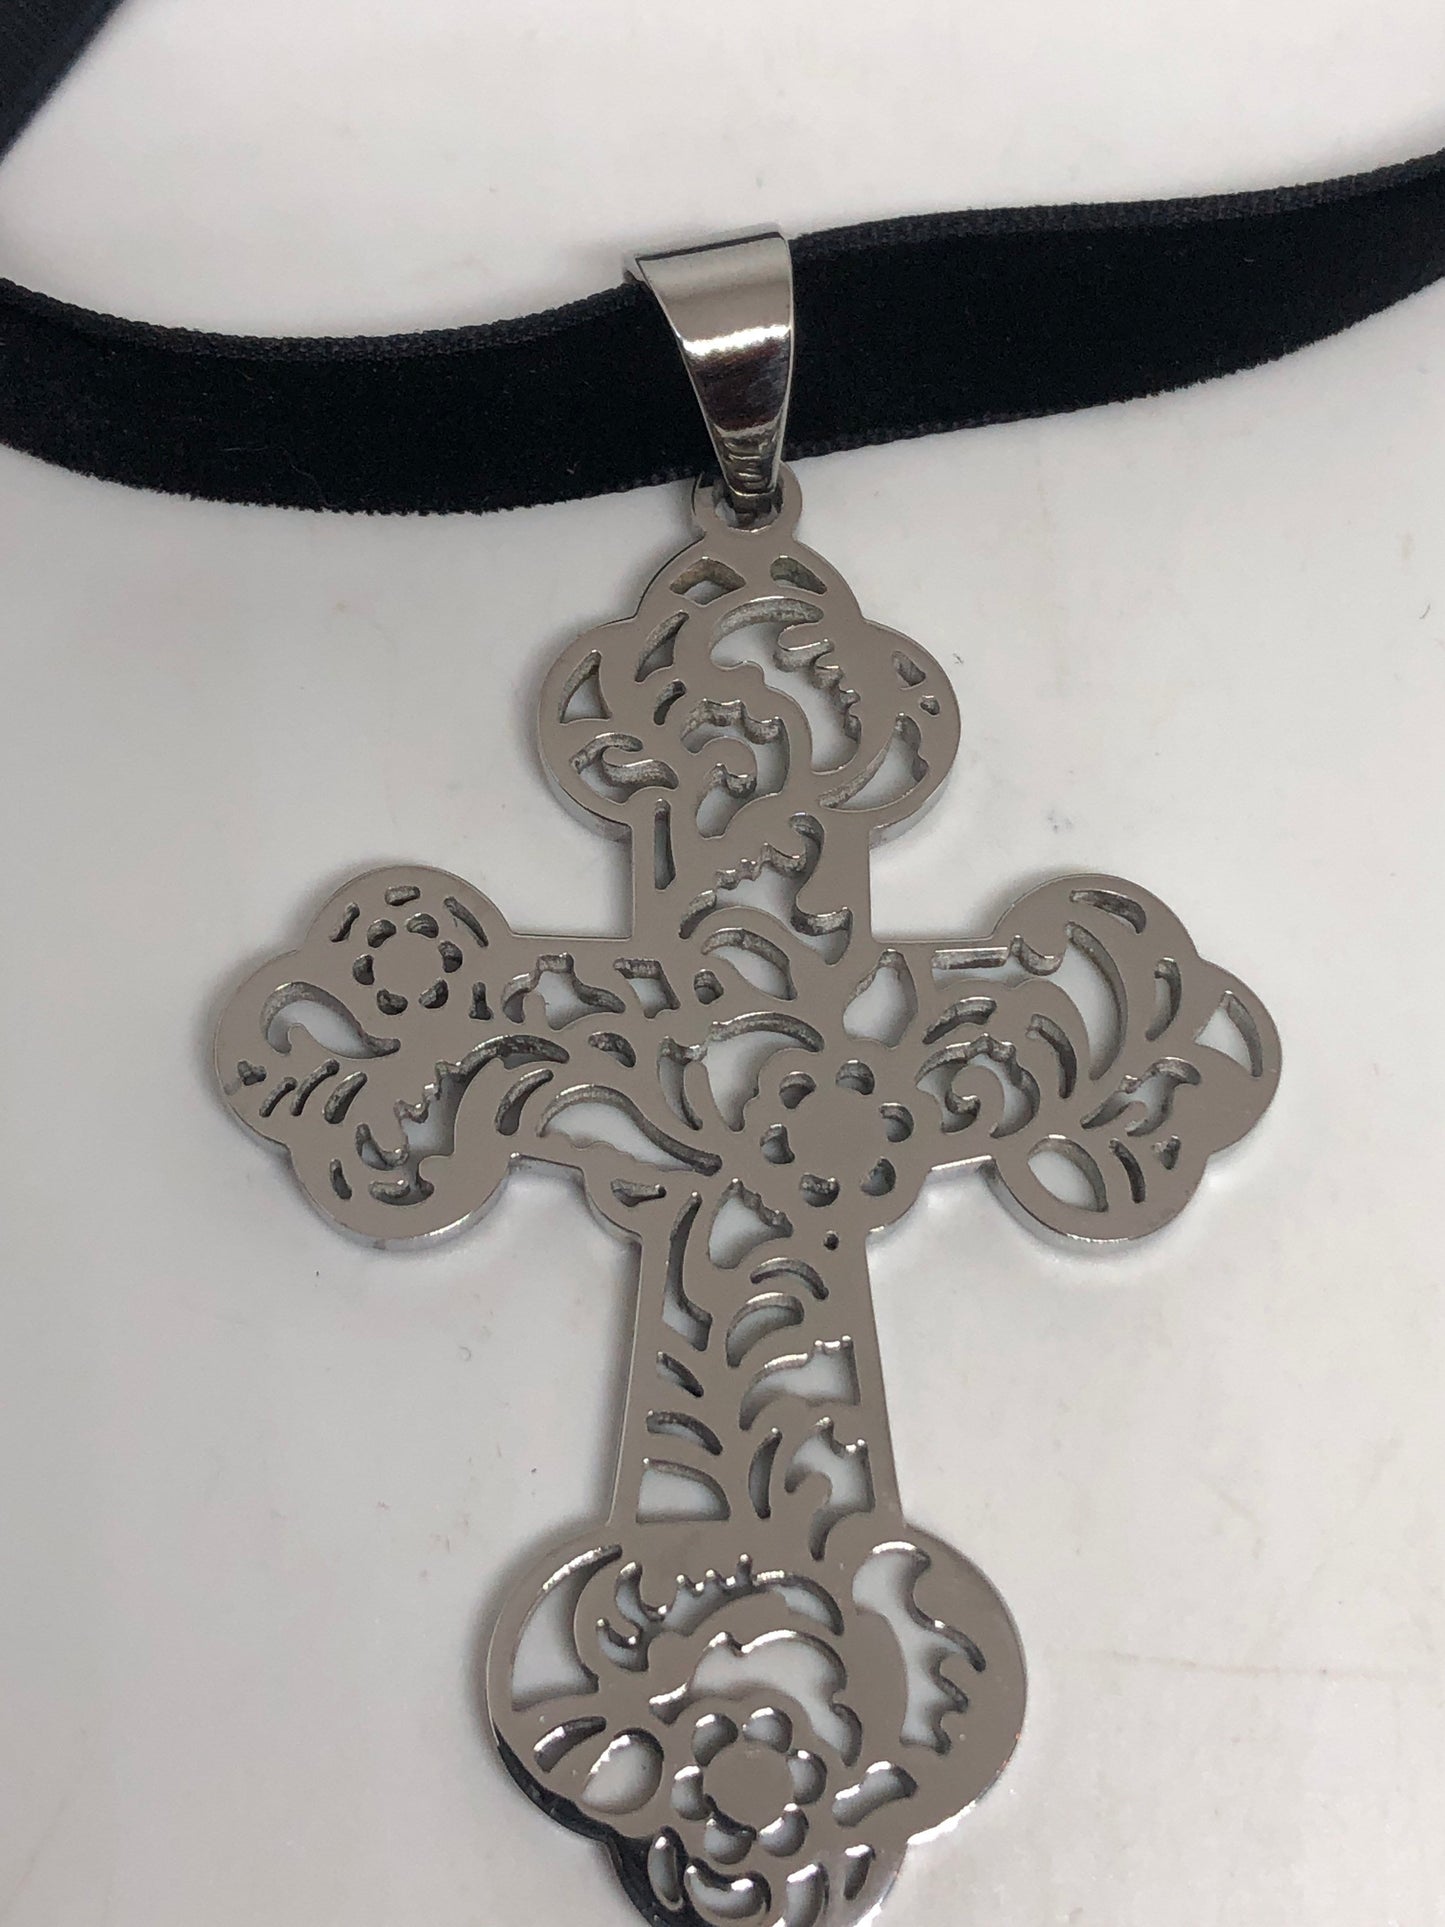 Large Handmade Vintage Silver Stainless Steel Cross Pendant Necklace